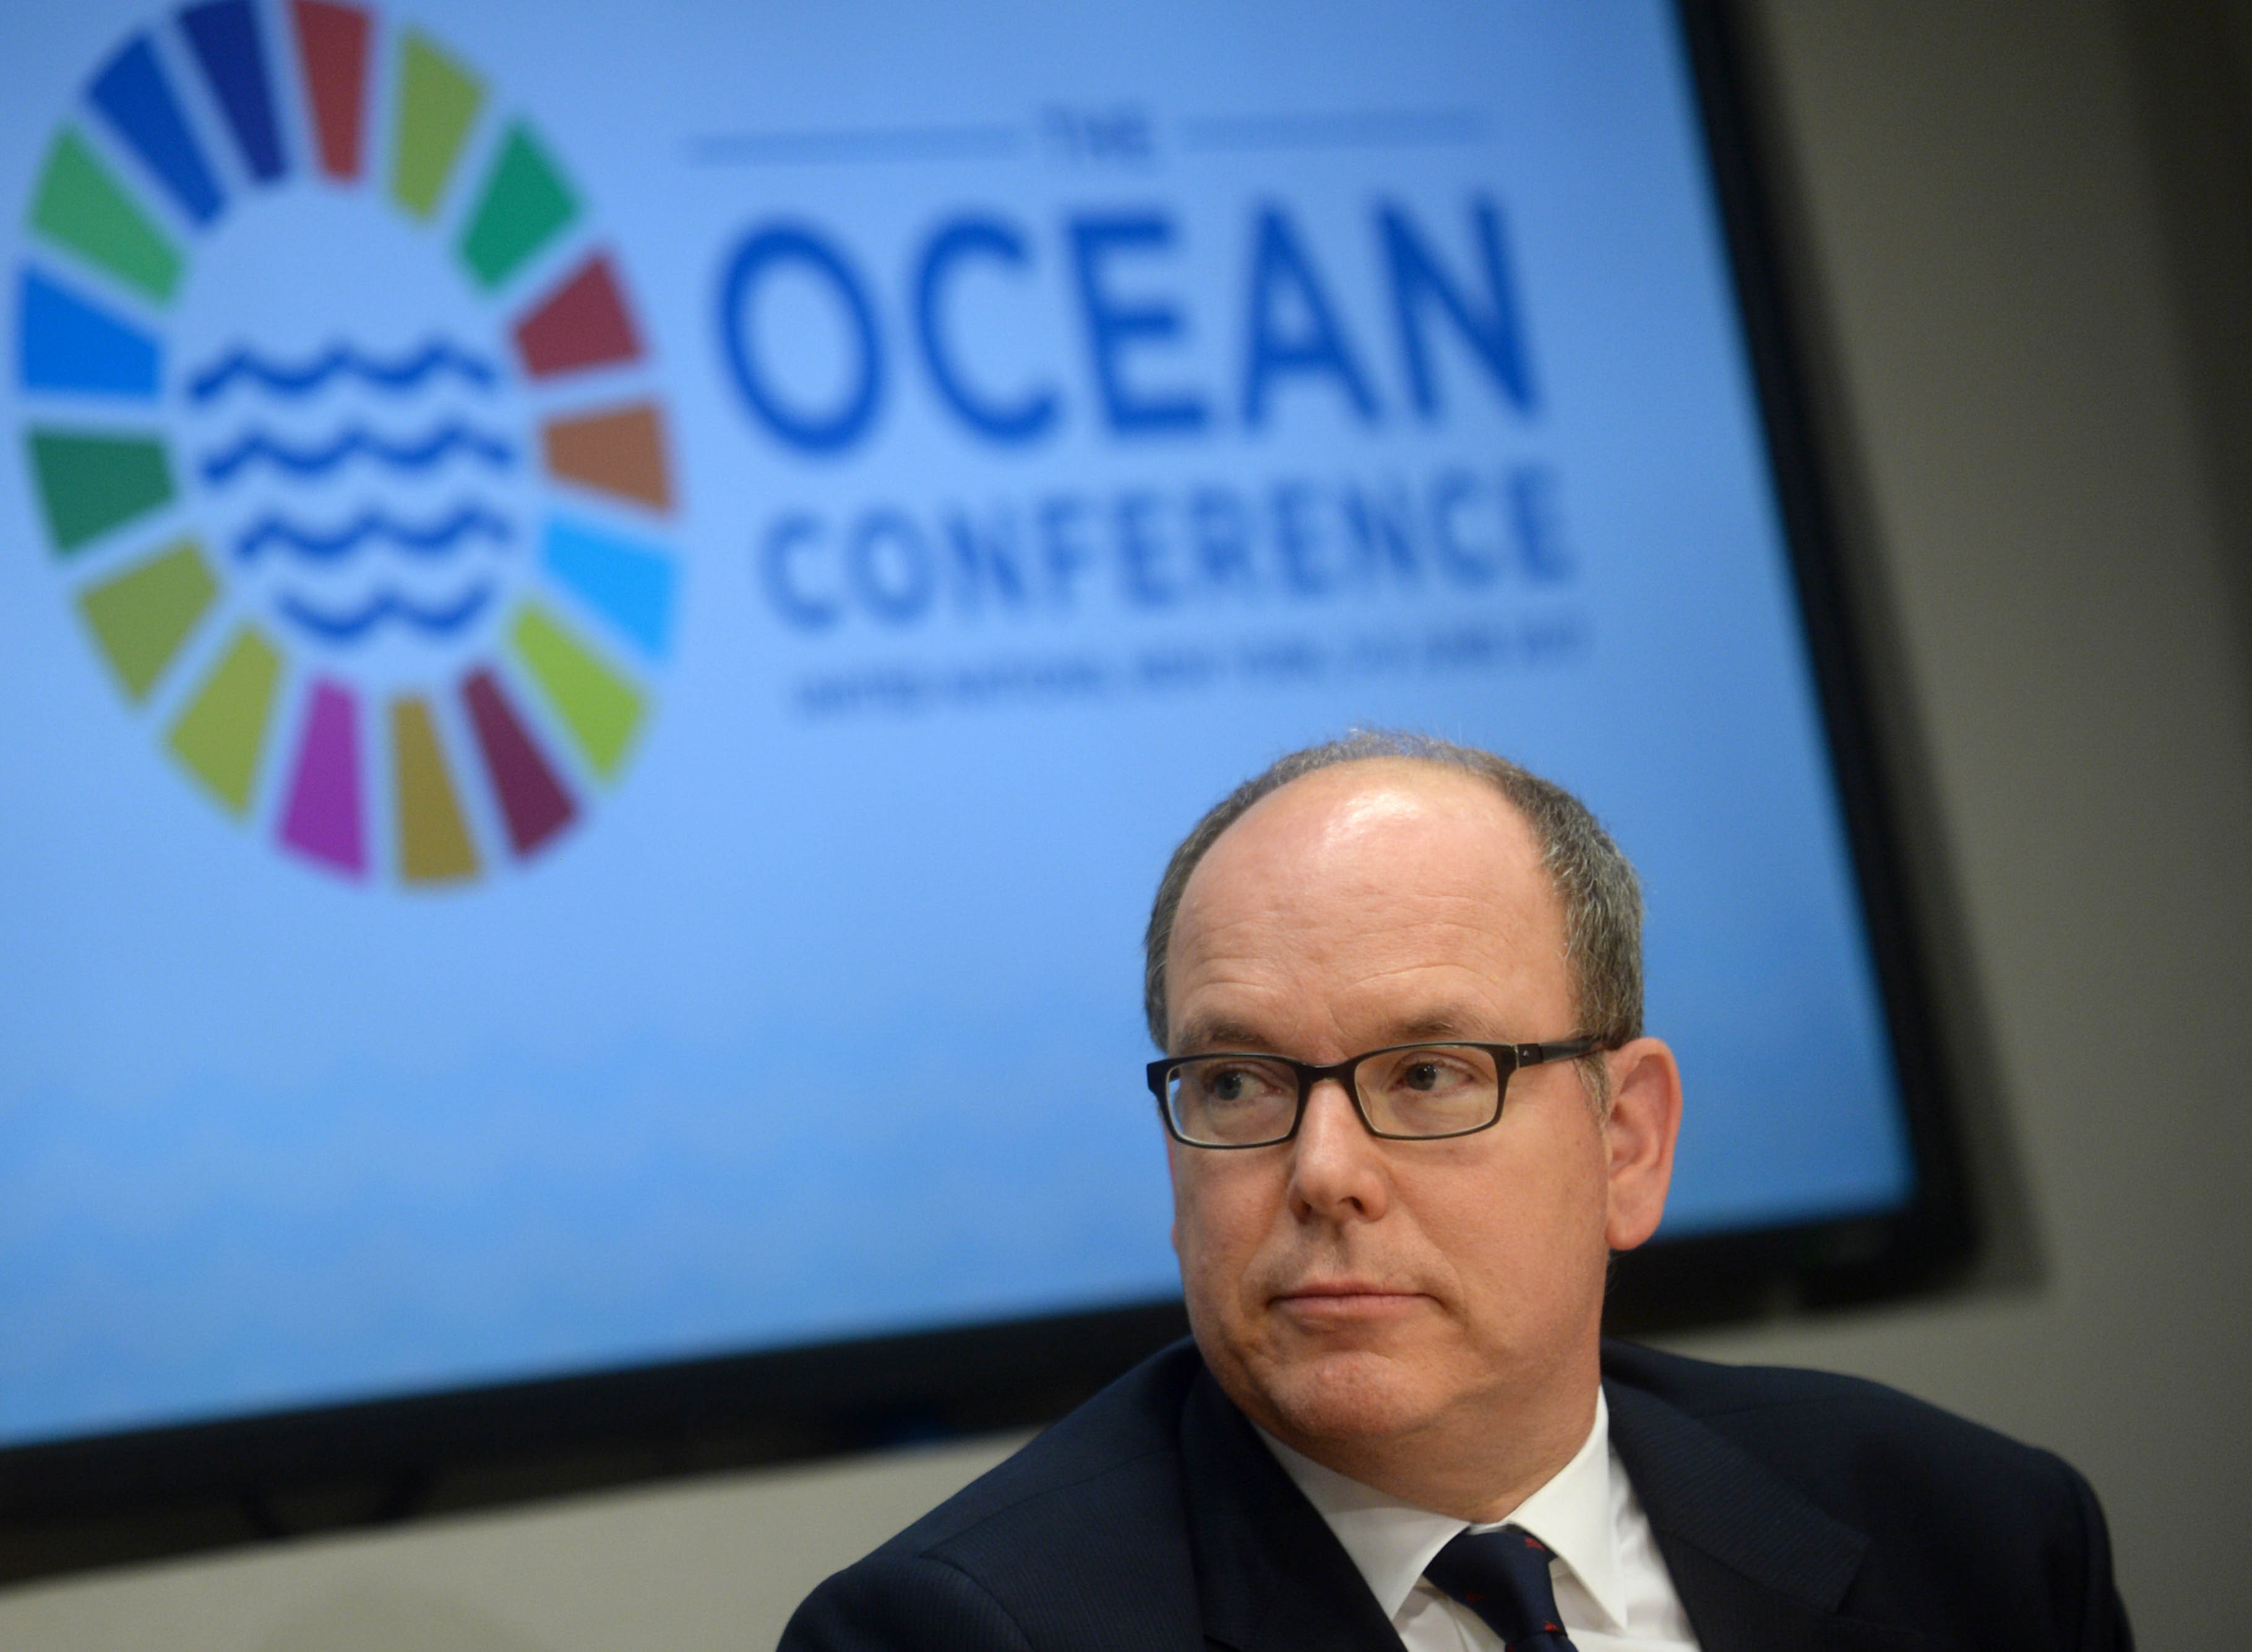 Photo by: Dennis Van Tine/STAR MAX/IPx
2017
6/7/17
Prince Albert II of Monaco at a Press Briefing  on the Ocean Conference at UN Headquarters in New York City.